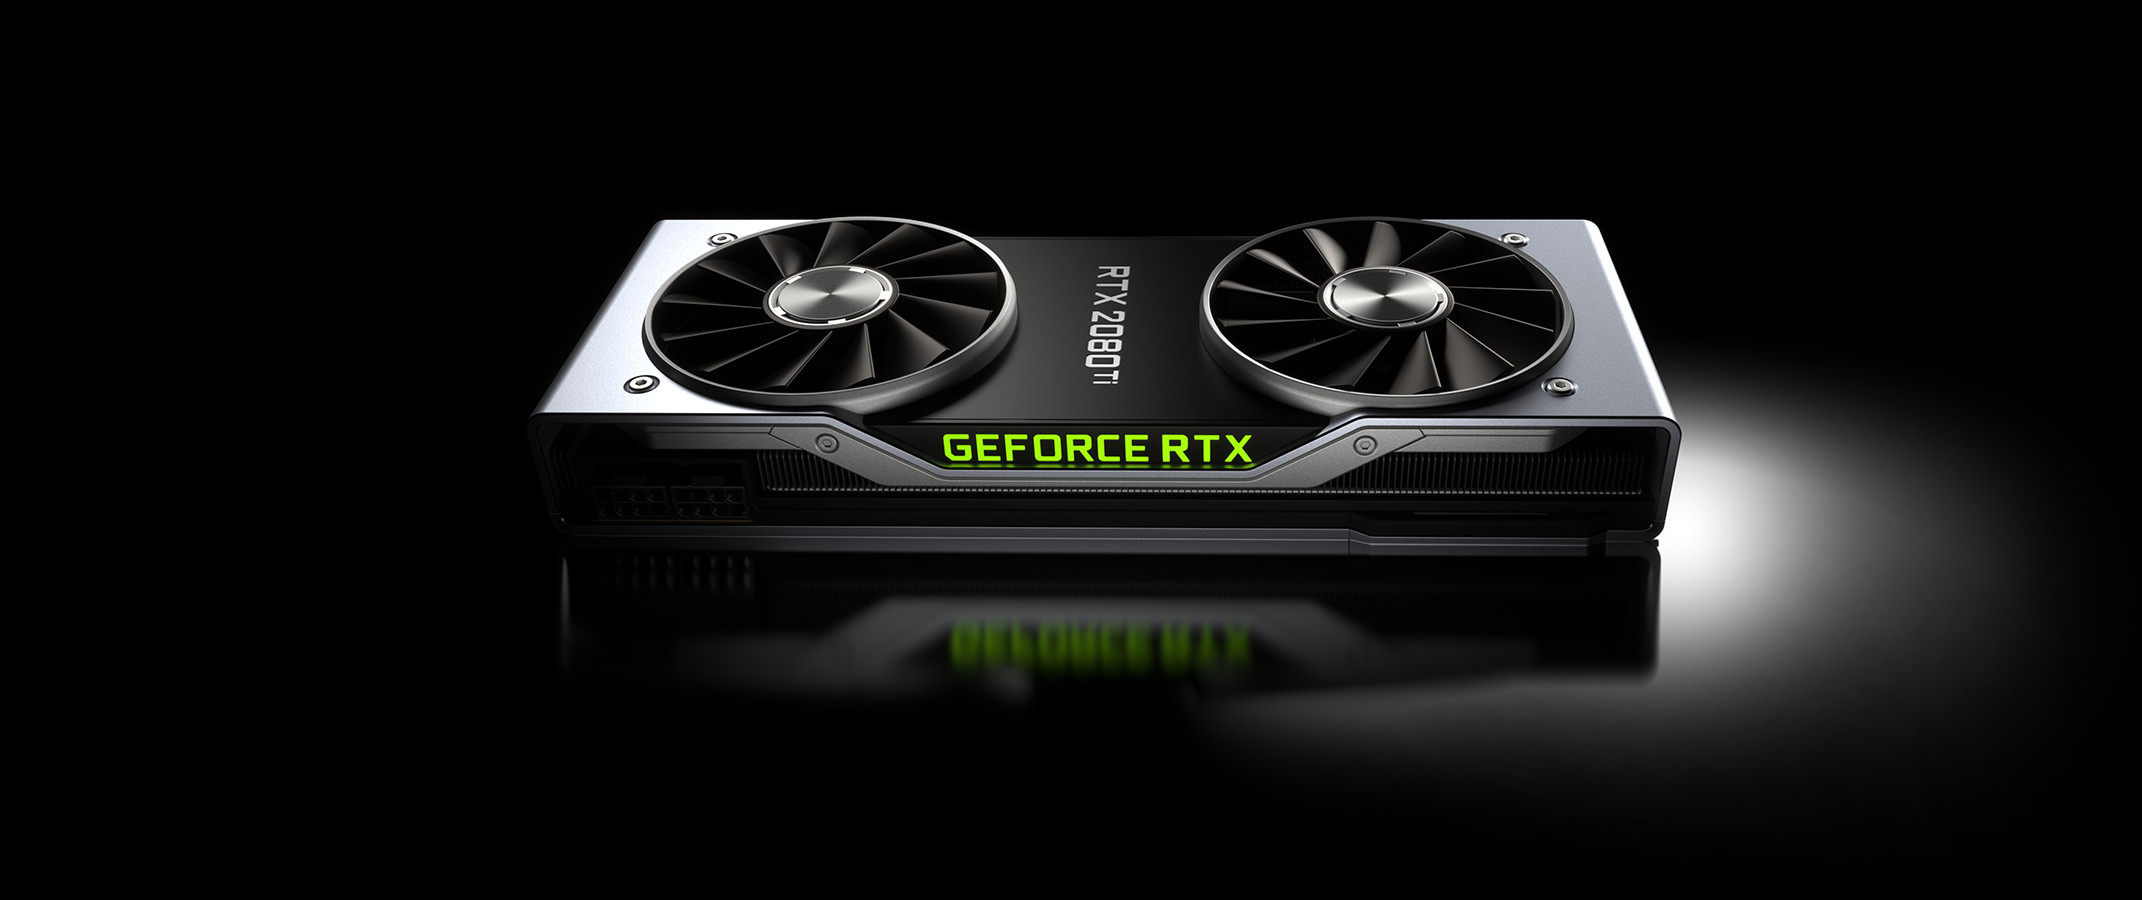 tilstrækkelig For pokker grave NVIDIA GeForce Ampere Series cards will start sampling as early as August: GeForce  RTX 3080 Ti could be in user's hands before the PlayStation 5 and Xbox  Series X - NotebookCheck.net News